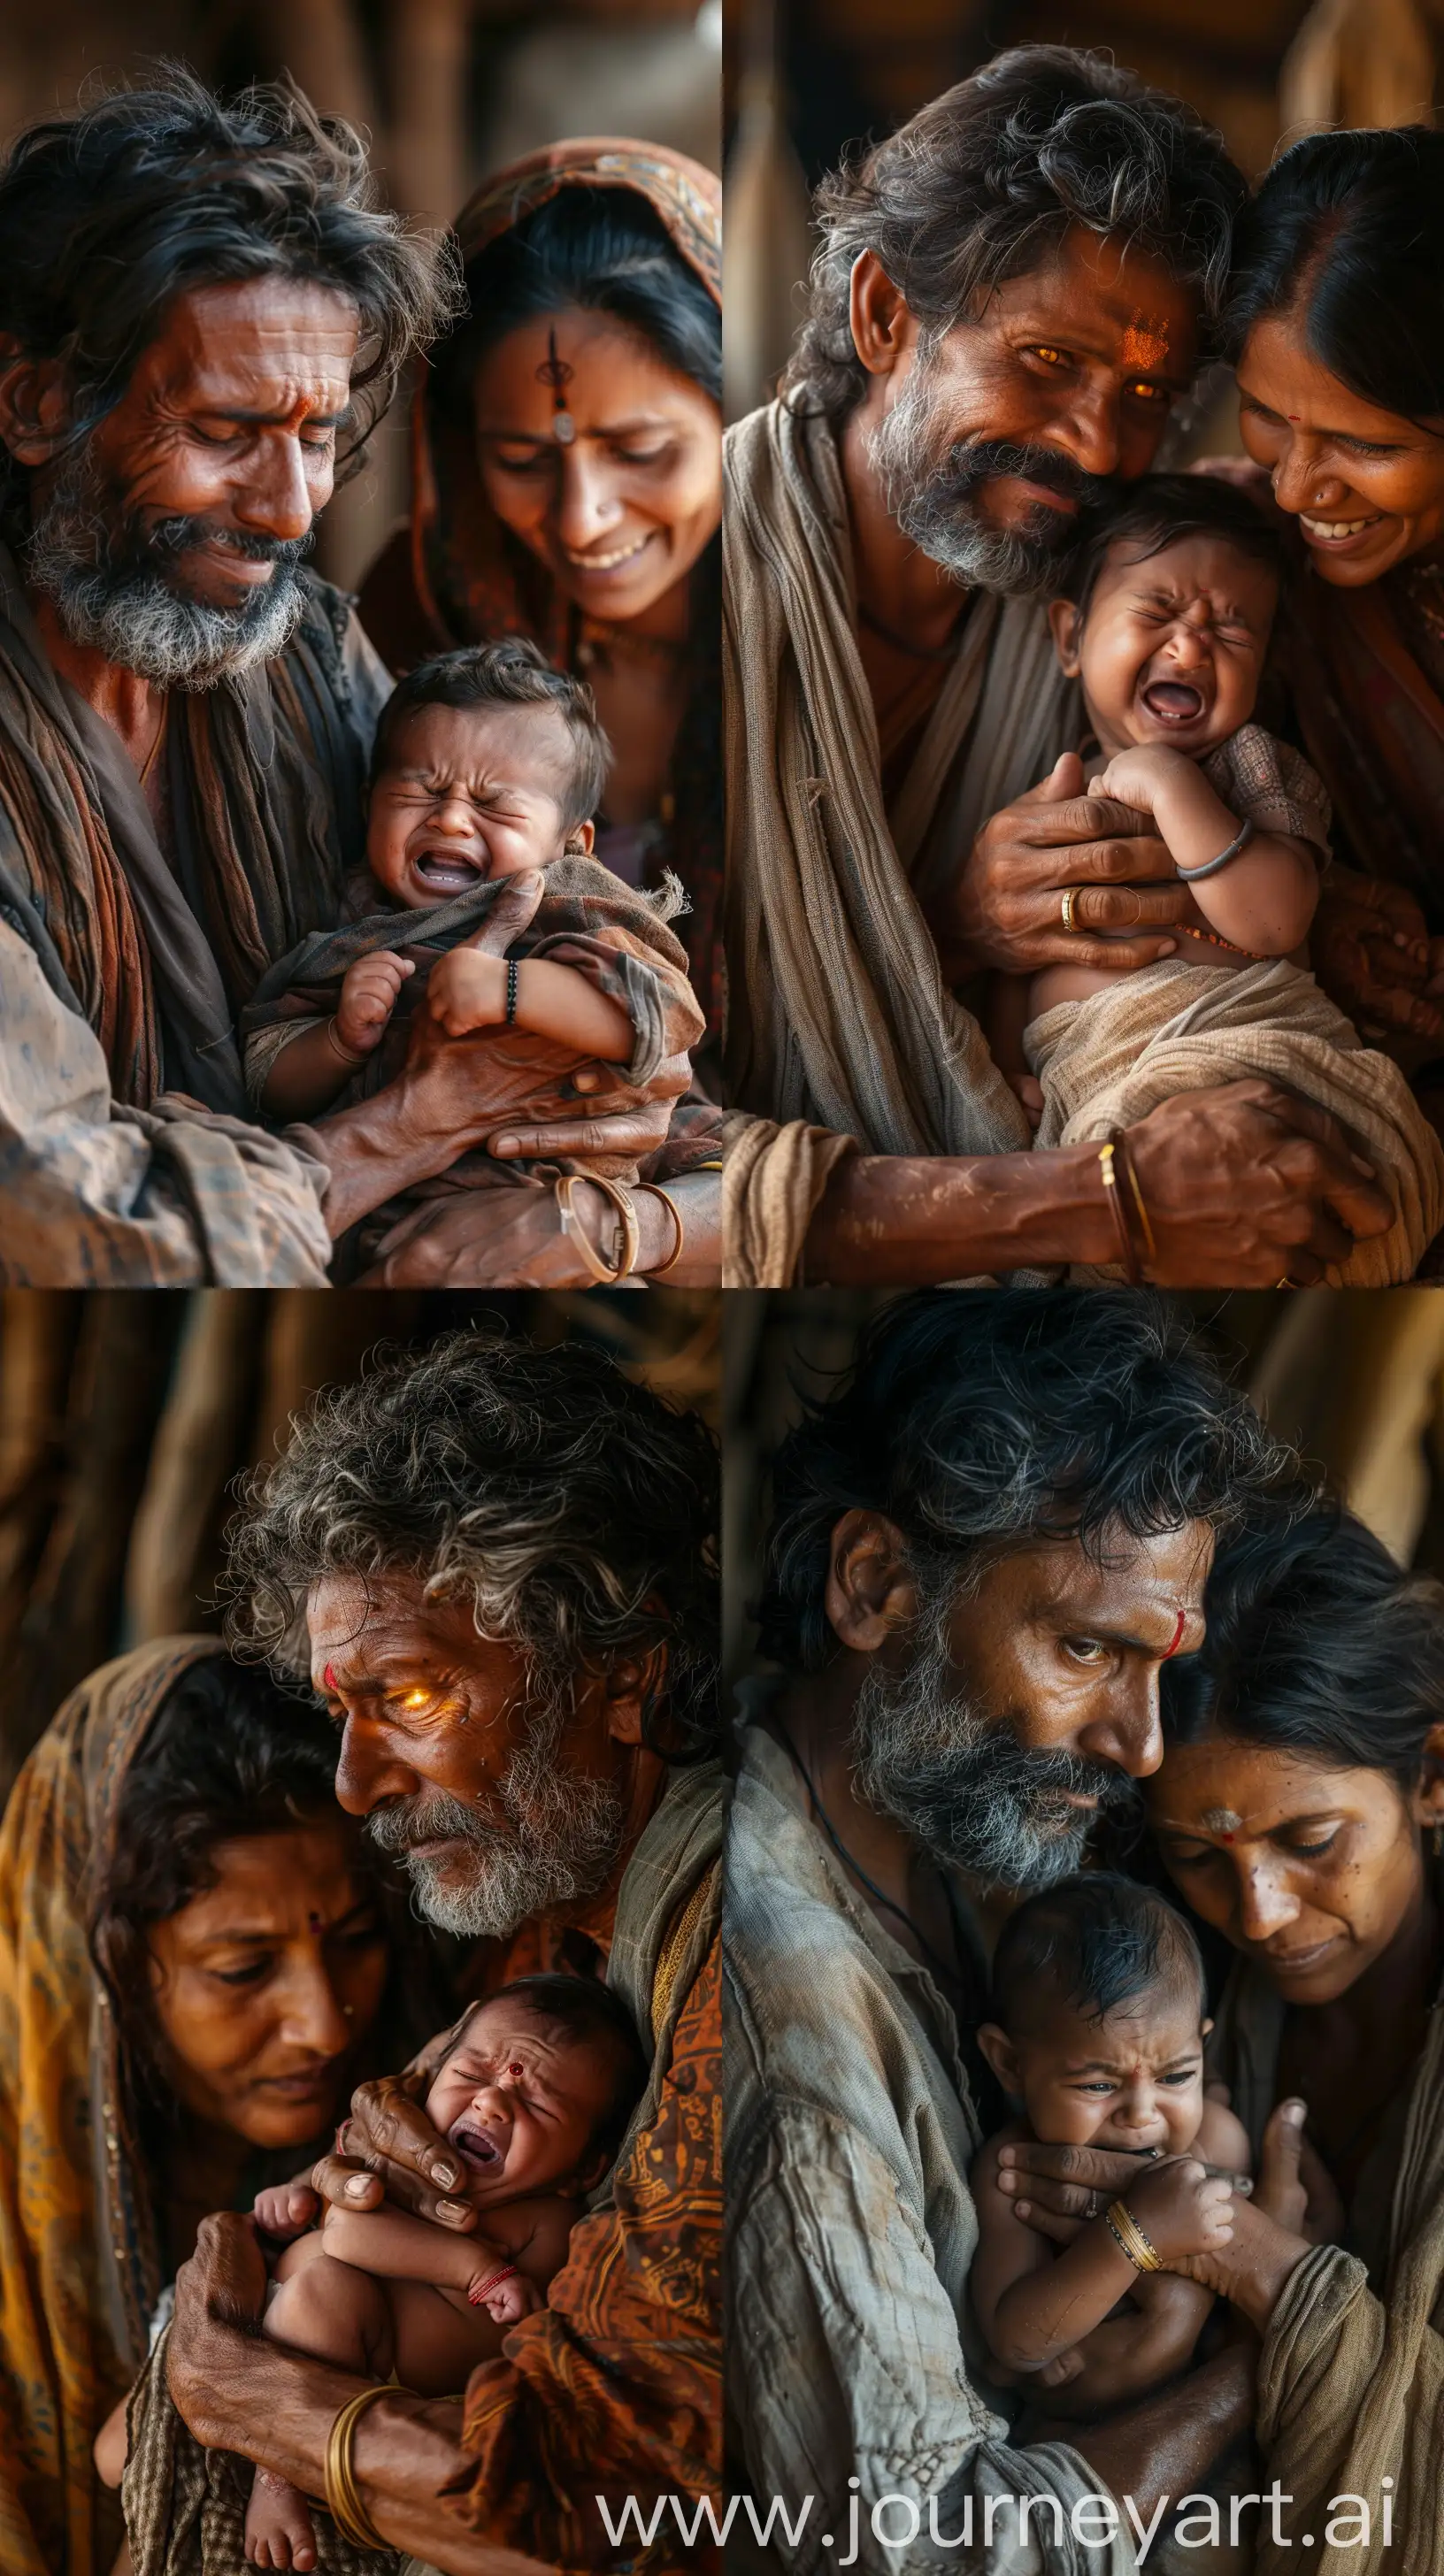 Emotional-MiddleAged-Indian-Couple-Embracing-Crying-Newborn-Baby-in-Serene-Rural-Setting